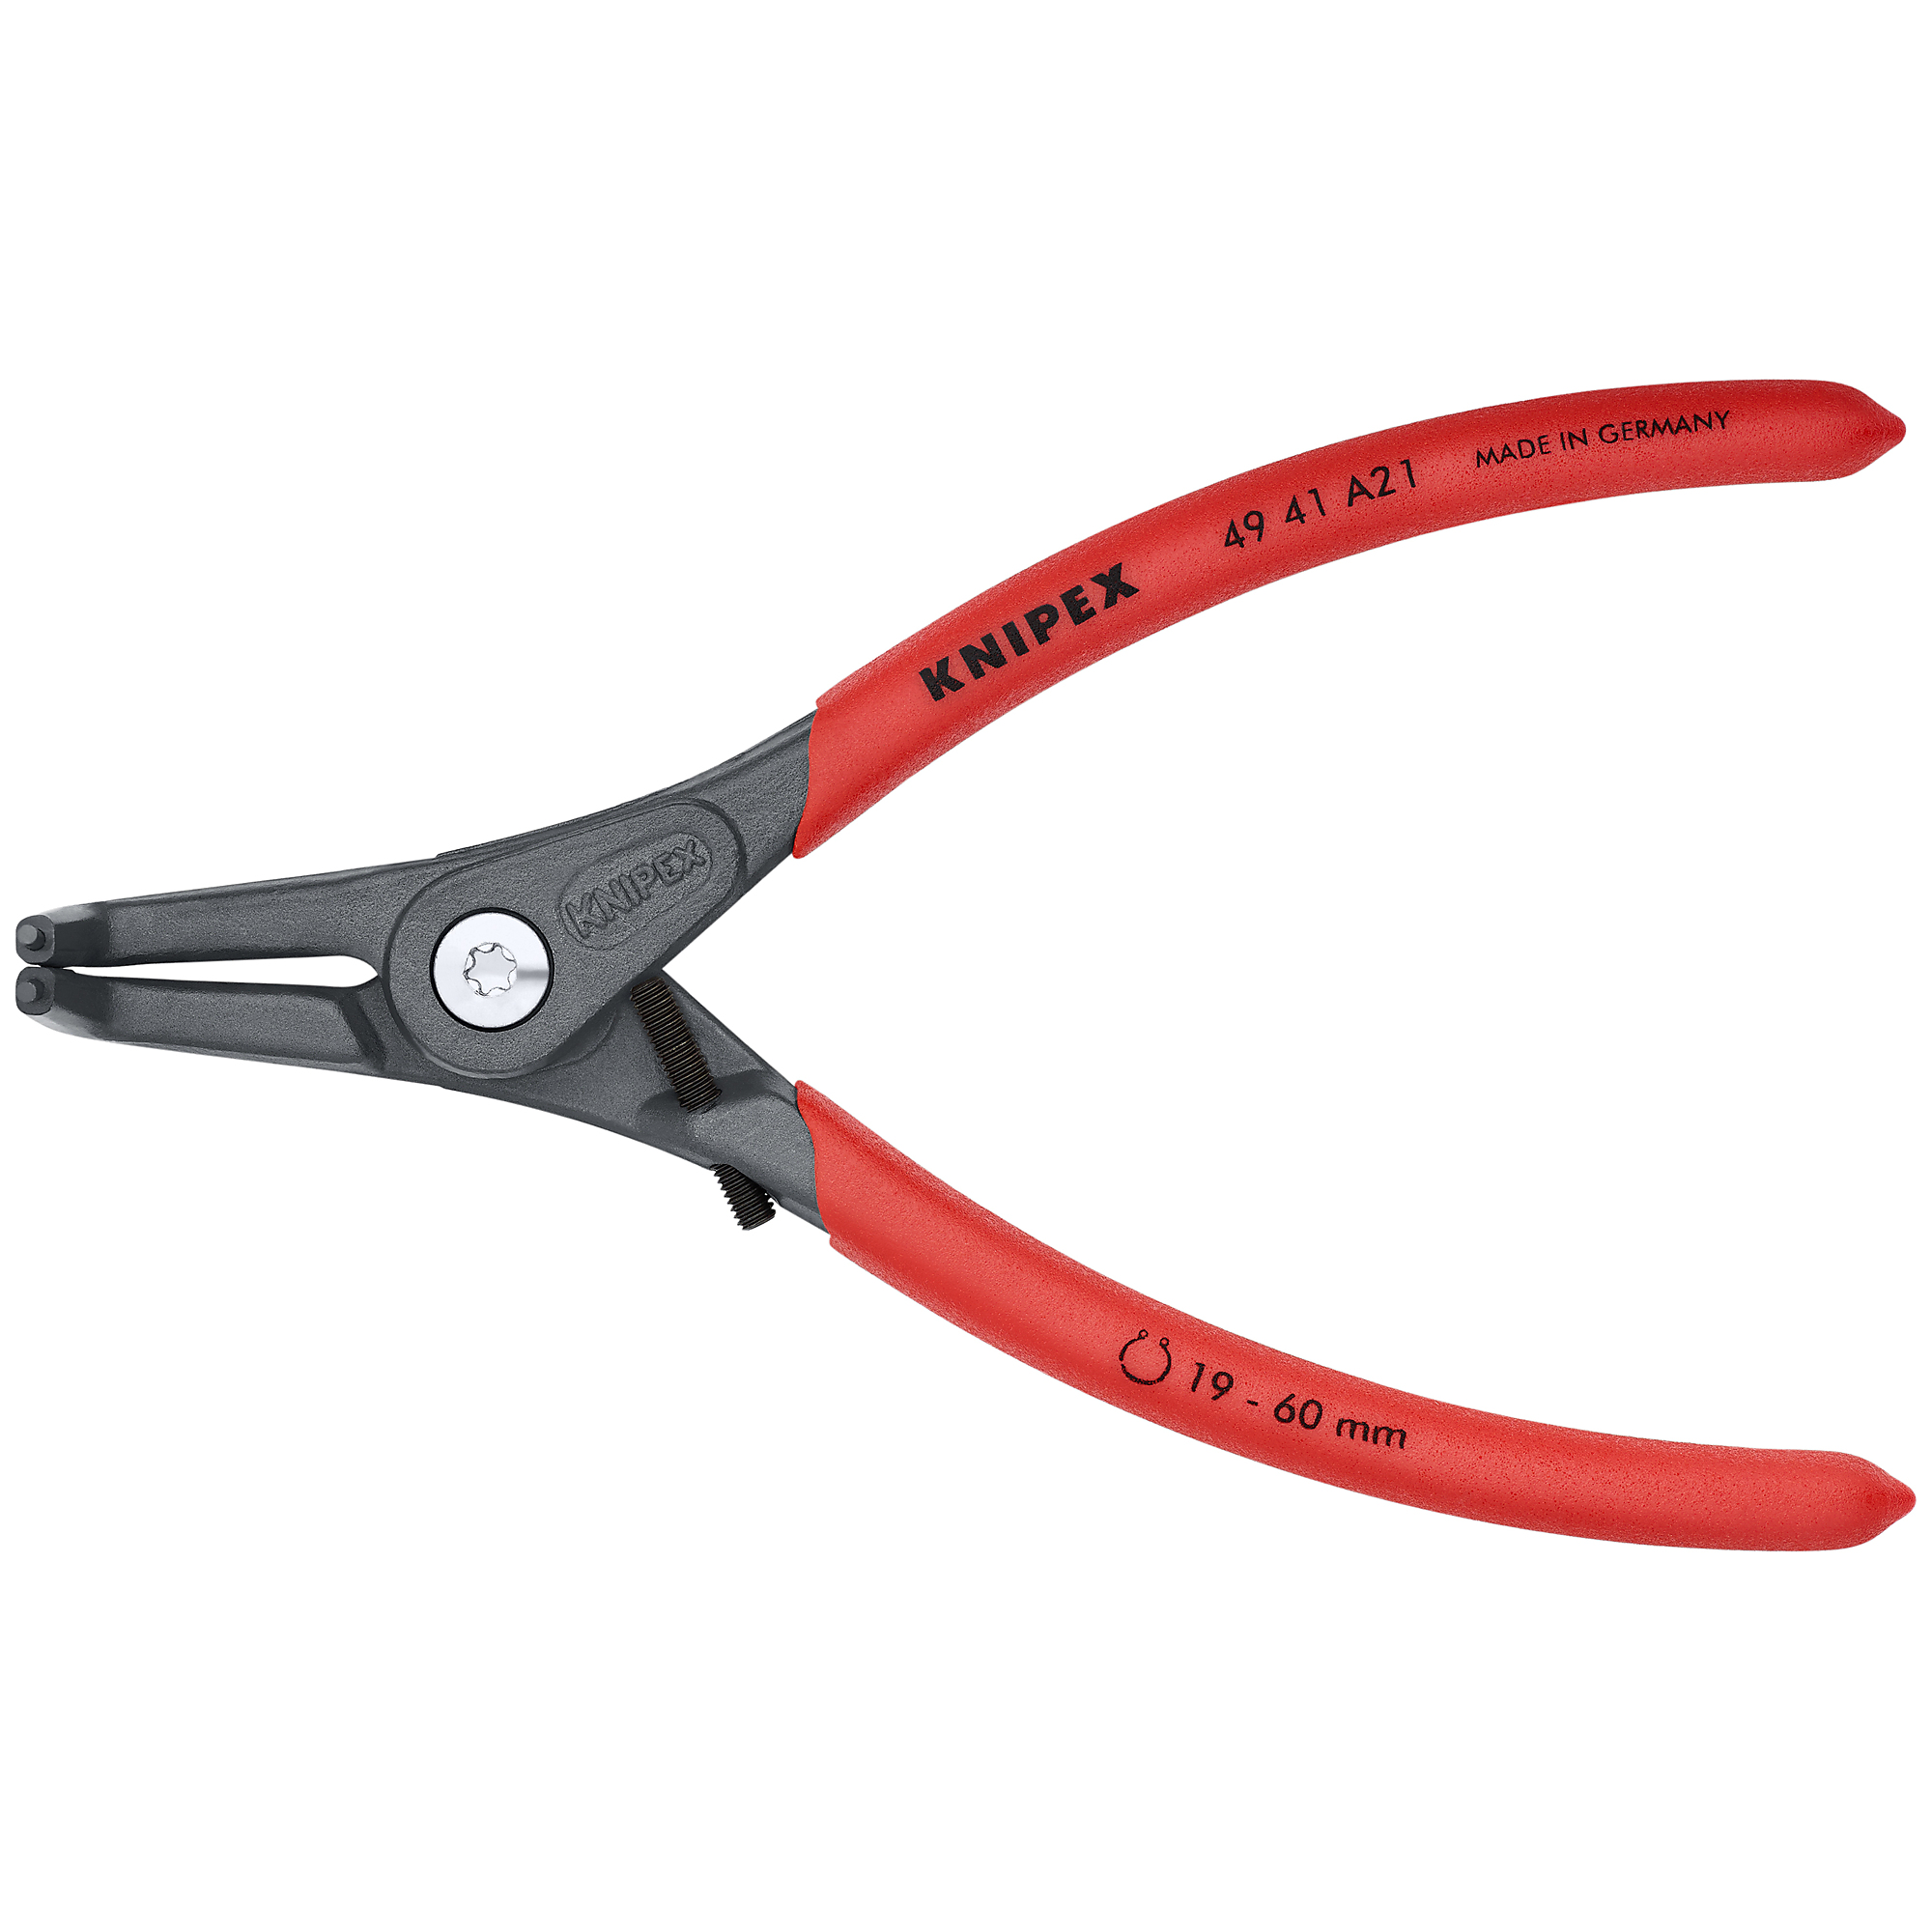 KNIPEX, Ext 90Â°Prec.Snap Ring Plrs-Limiter,5/64 tip,7Inch, Pieces (qty.) 1 Material Steel, Model 49 41 A21